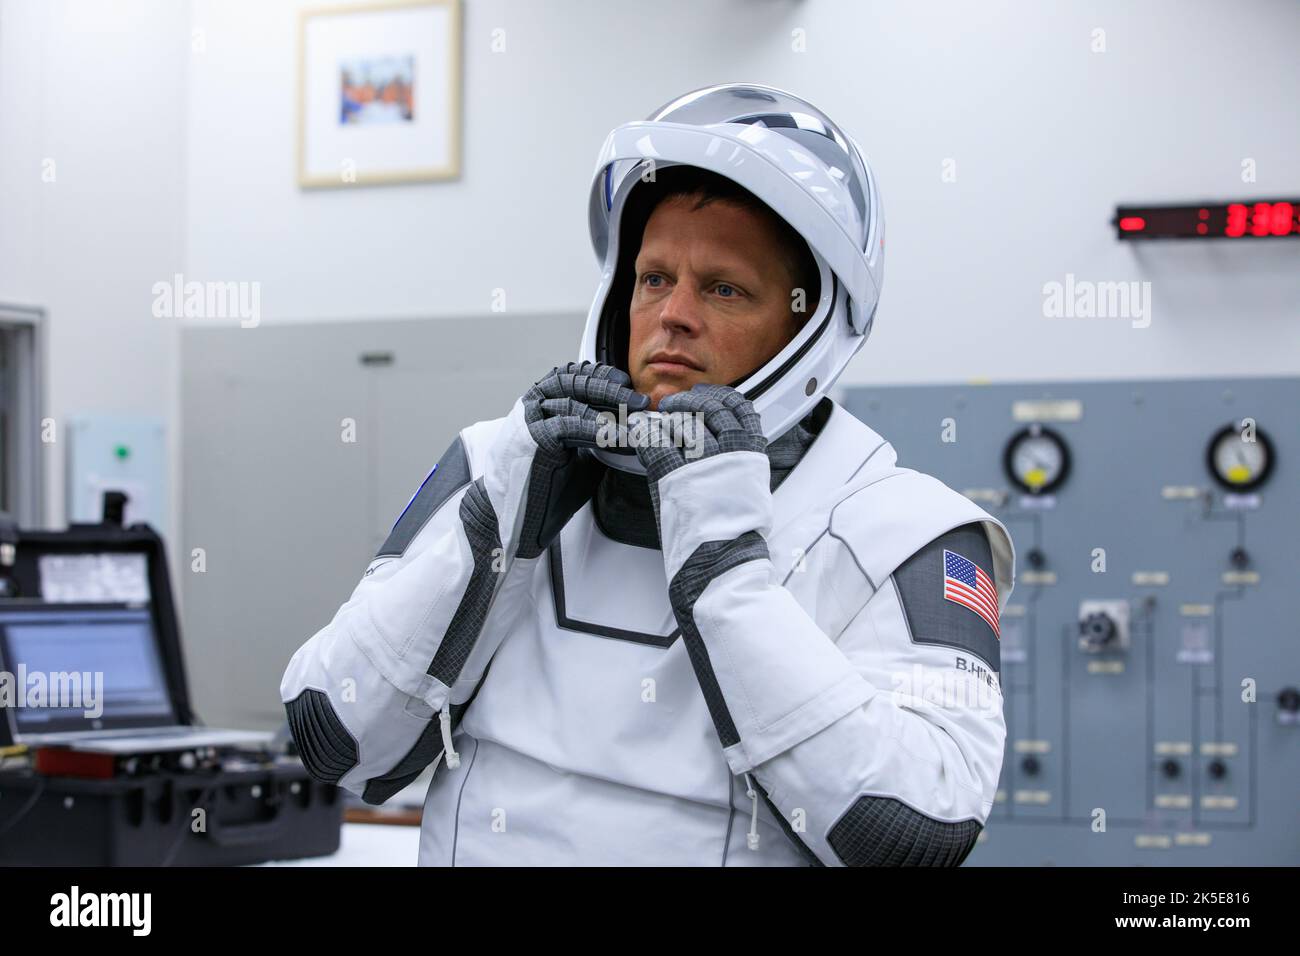 NASA astronaut Bob Hines adjusts his helmet in the suit room inside Kennedy Space Center’s Neil A. Armstrong Operations and Checkout Building during NASA’s SpaceX Crew-4 dry dress rehearsal on April 20, 2022. Hines, along with fellow Crew-4 astronauts Kjell Lindgren, Jessica Watson, and Samantha Cristoforetti, is scheduled to lift off from Kennedy’s Launch Complex 39A at 5:26 a.m. EDT on April 23, 2022. SpaceX’s Falcon 9 rocket and Crew Dragon, named Freedom by the Crew-4 crew, will launch the astronauts to the International Space Station as part of NASA’s Commercial Crew Program. Stock Photo